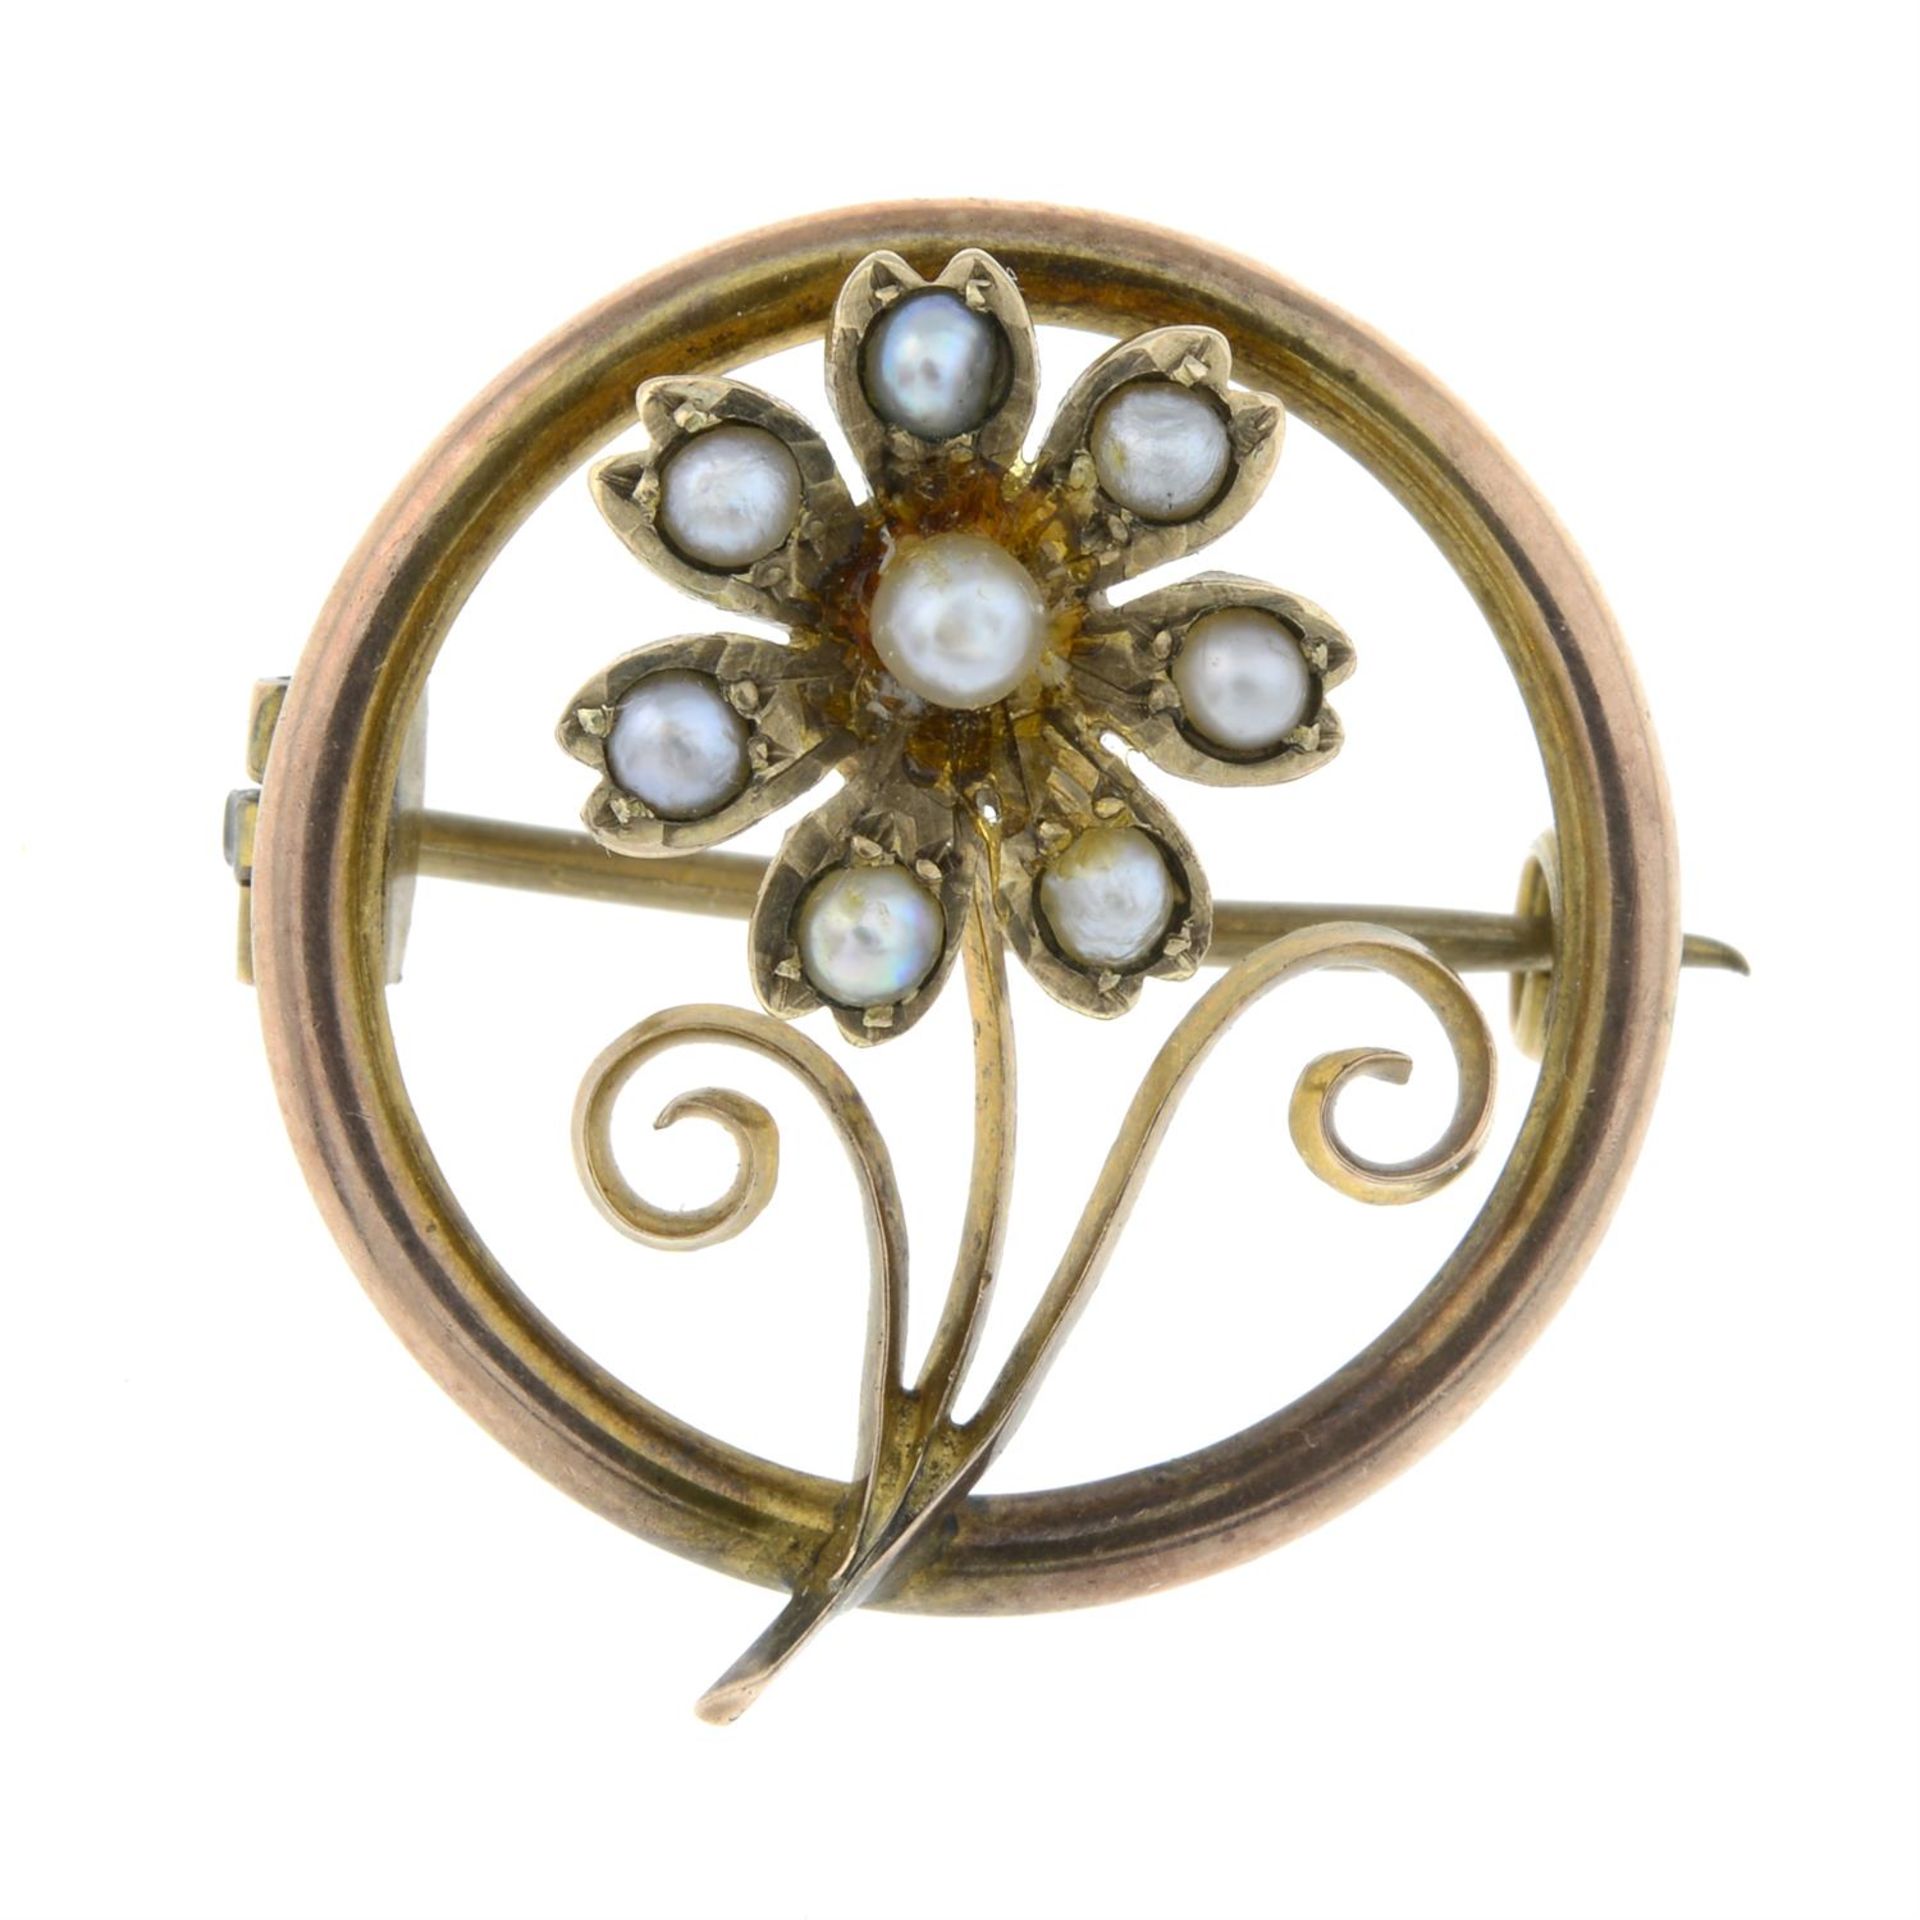 An early 20th century 9ct gold split pearl and seed pearl floral motif brooch.